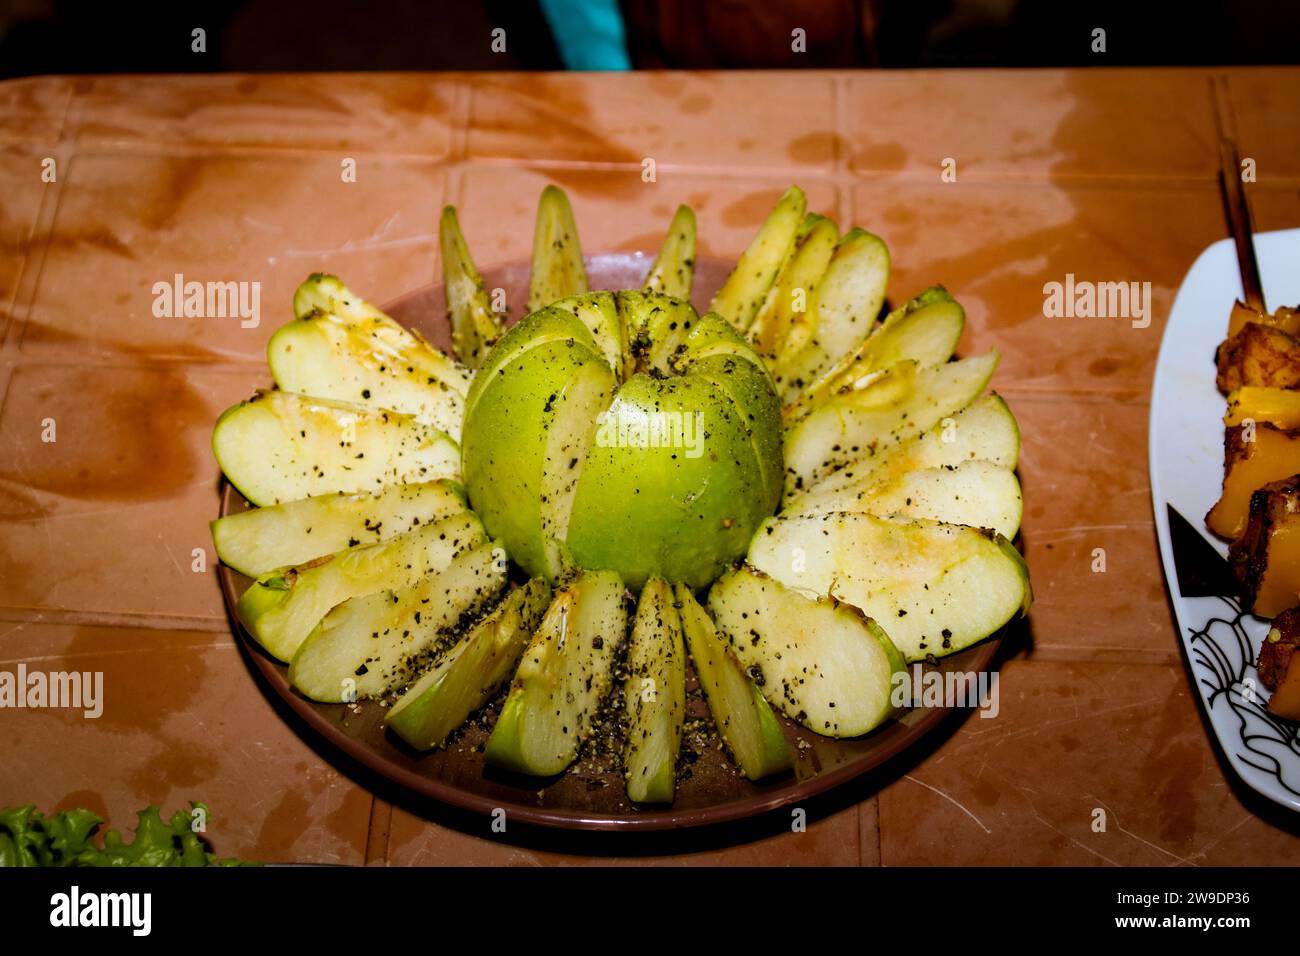 Green apple with pepper cut into pieces, lying on the saucer on a wooden background, studio lighting Stock Photo